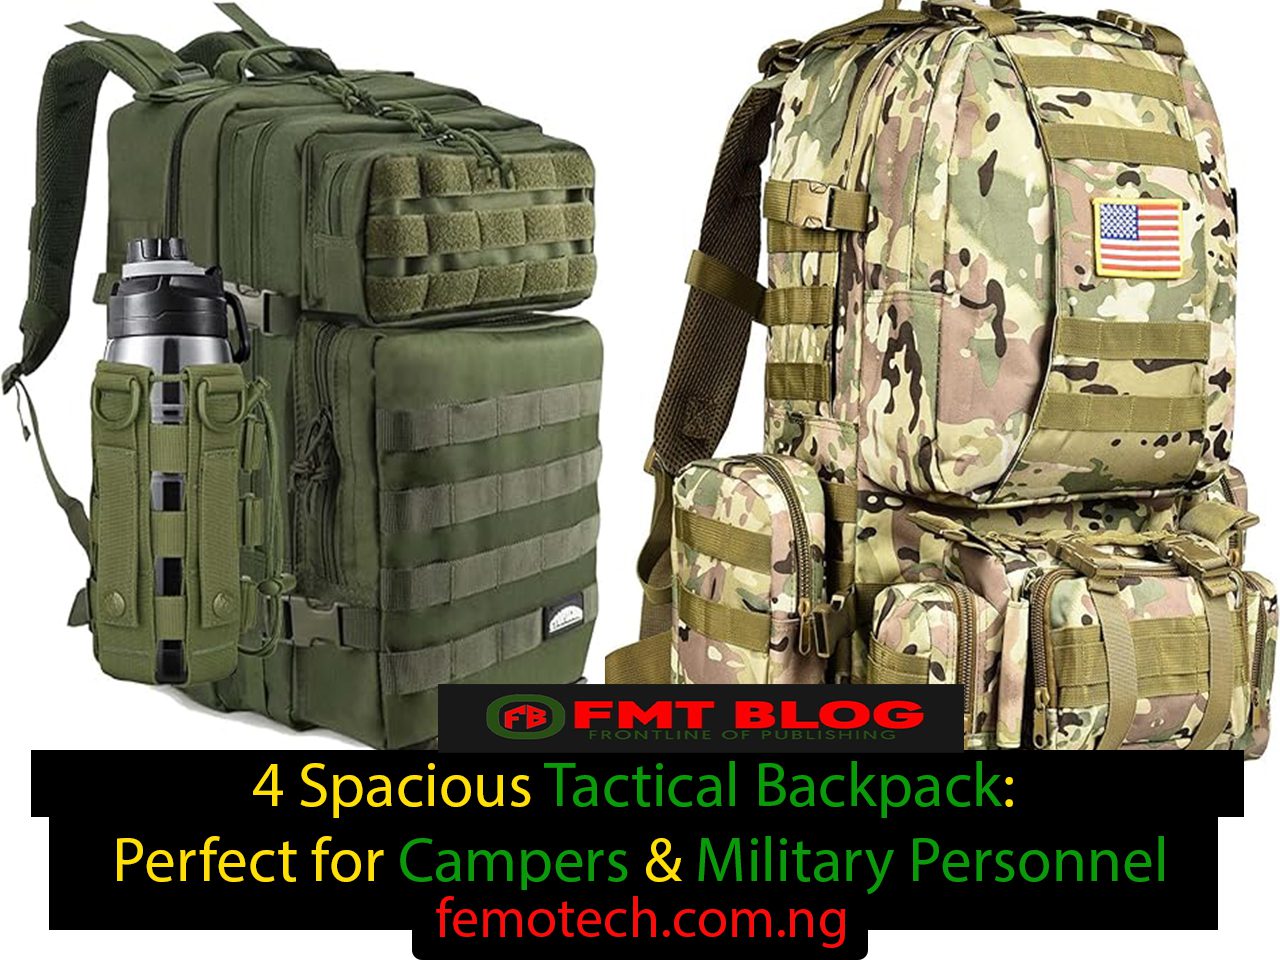 4 Spacious Tactical Backpack: Perfect for Campers & Military Personnel